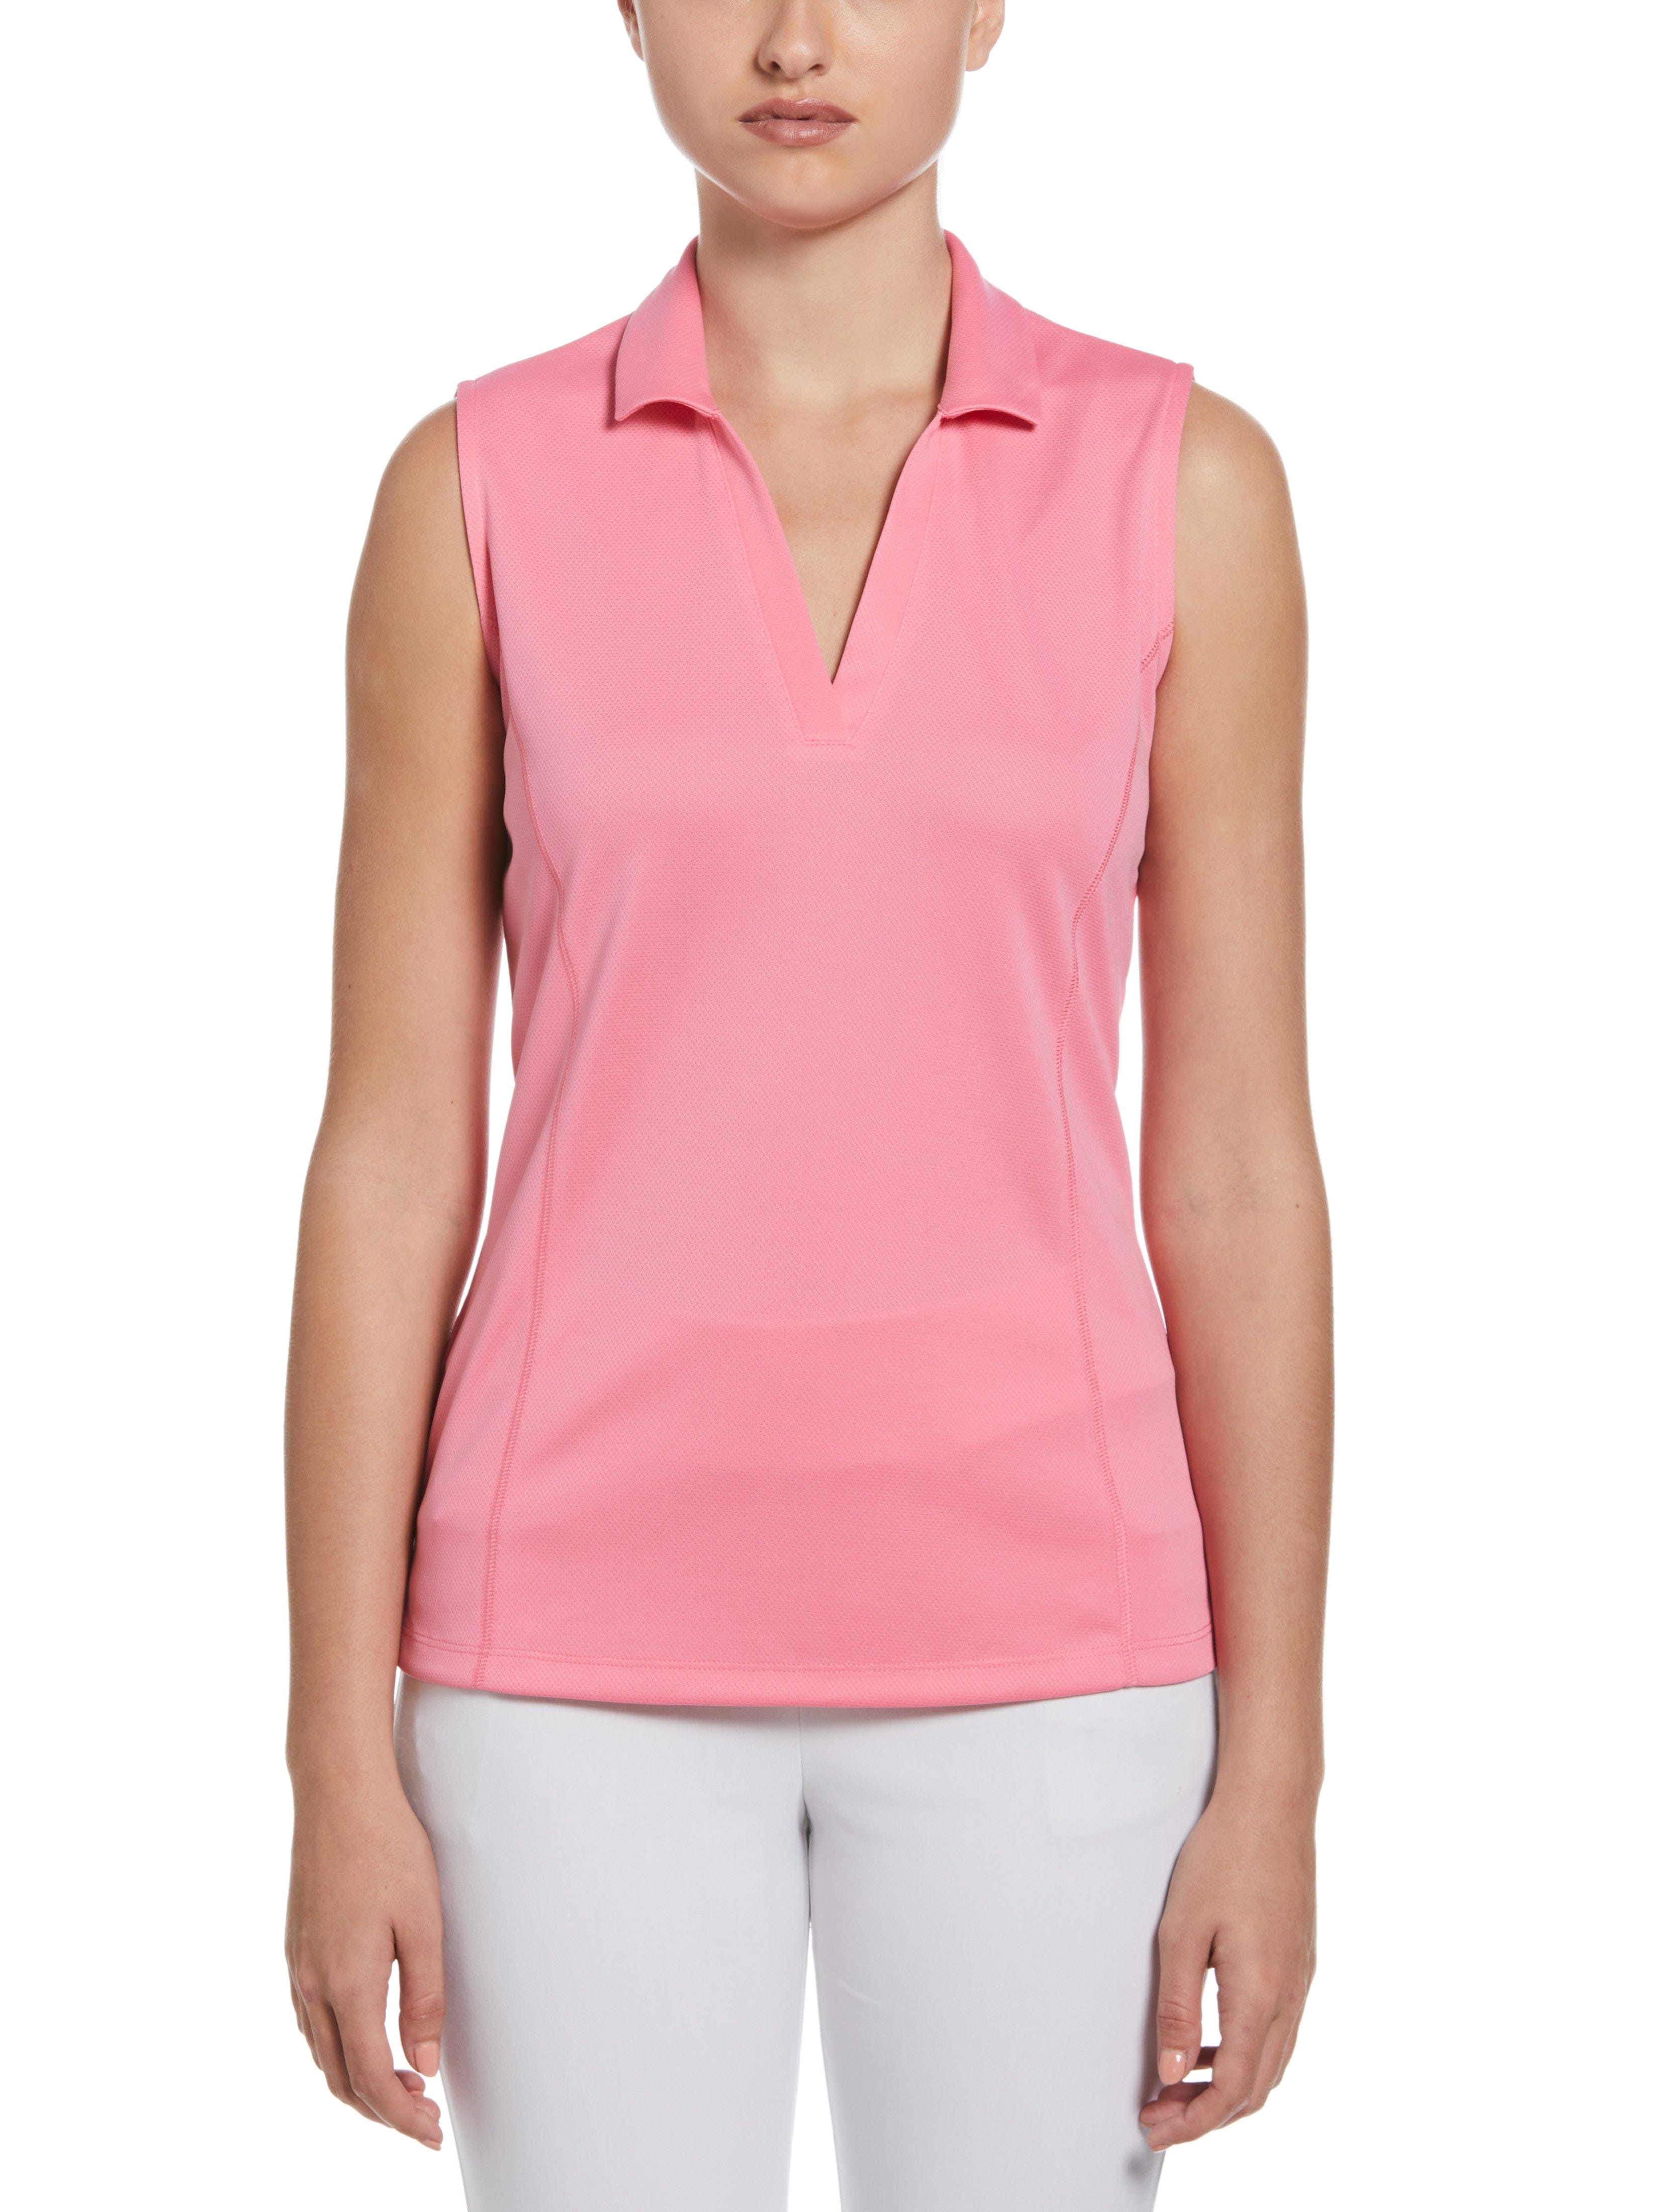 PGA TOUR Apparel Womens AirFlux™ Solid Sleeveless Golf Polo Shirt, Size Small, Flowering Ginger Pink, 100% Polyester | Golf Apparel Shop